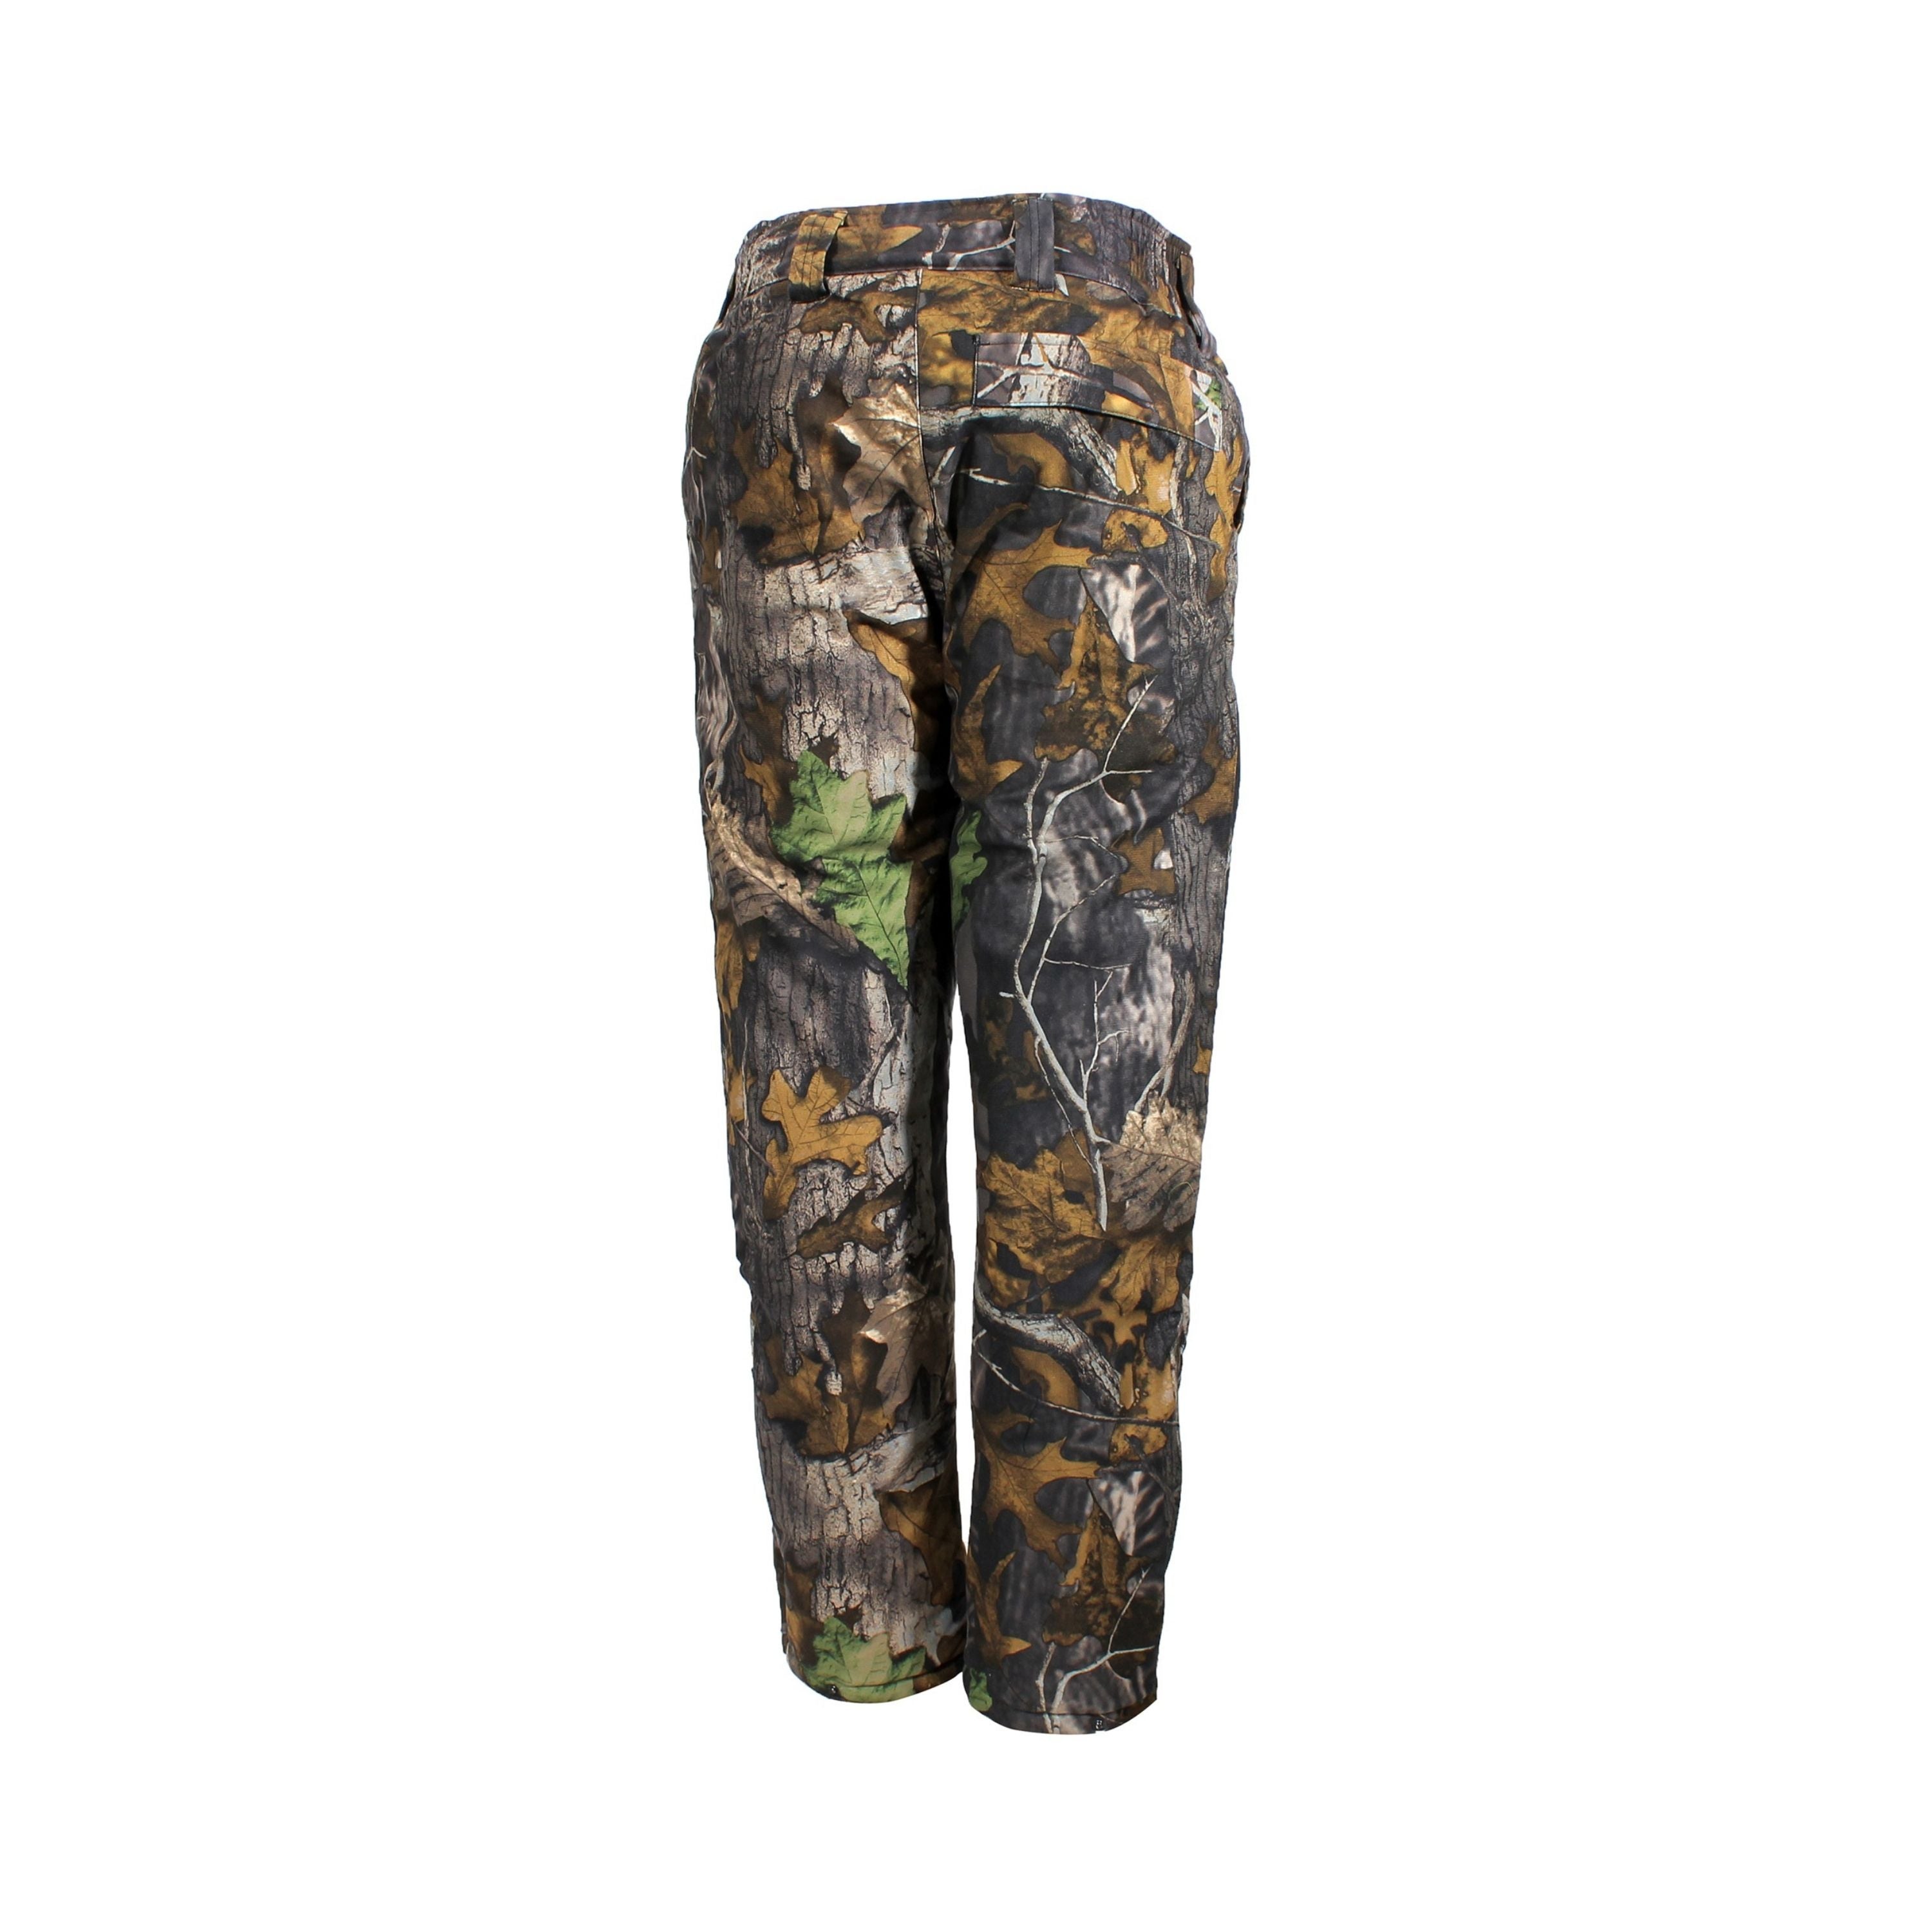 "Quest" Insulated pants - Women's